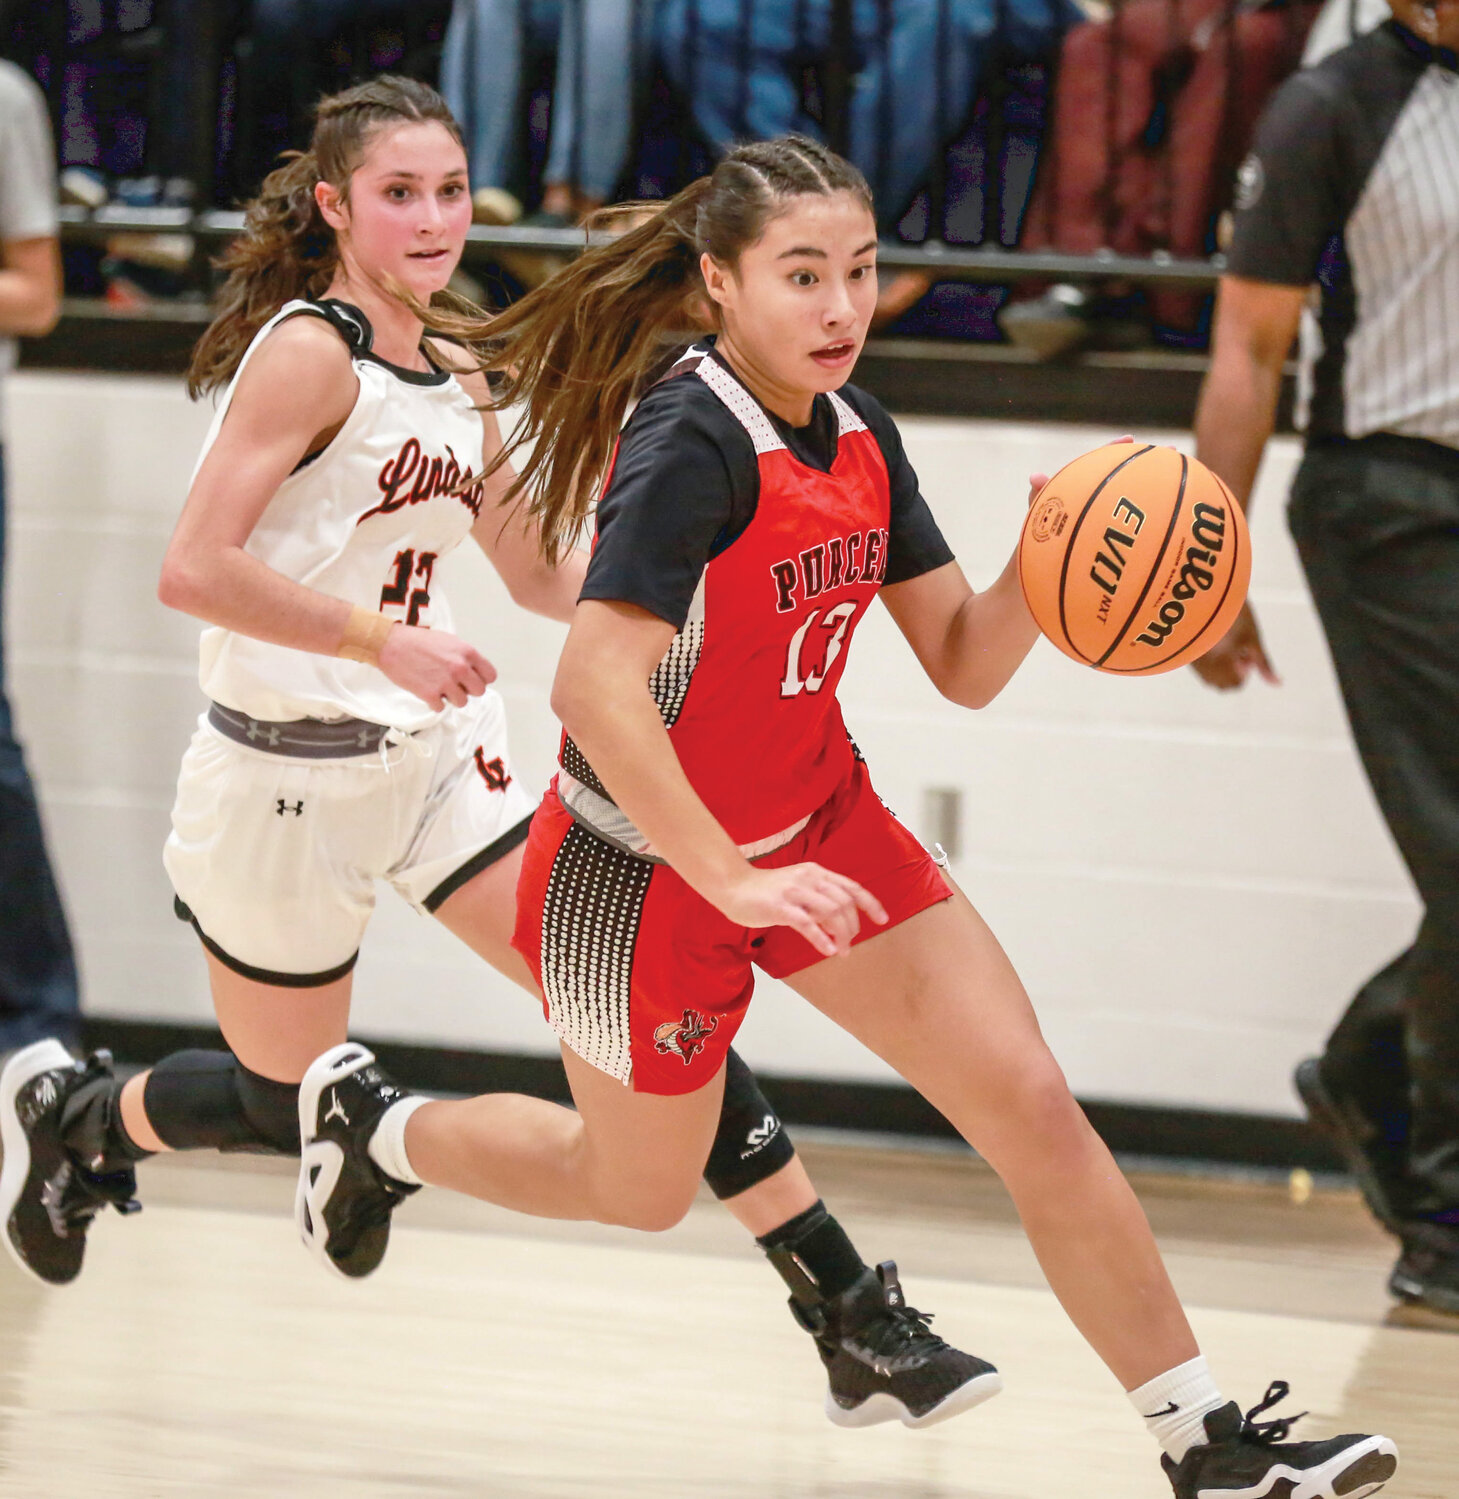 Purcell sophomore Kaylin Vazquez dribbles ahead of the Lindsay defense during the Dragons’ 66-47 win over the Leopards last Friday. Vazquez scored five points in the game.